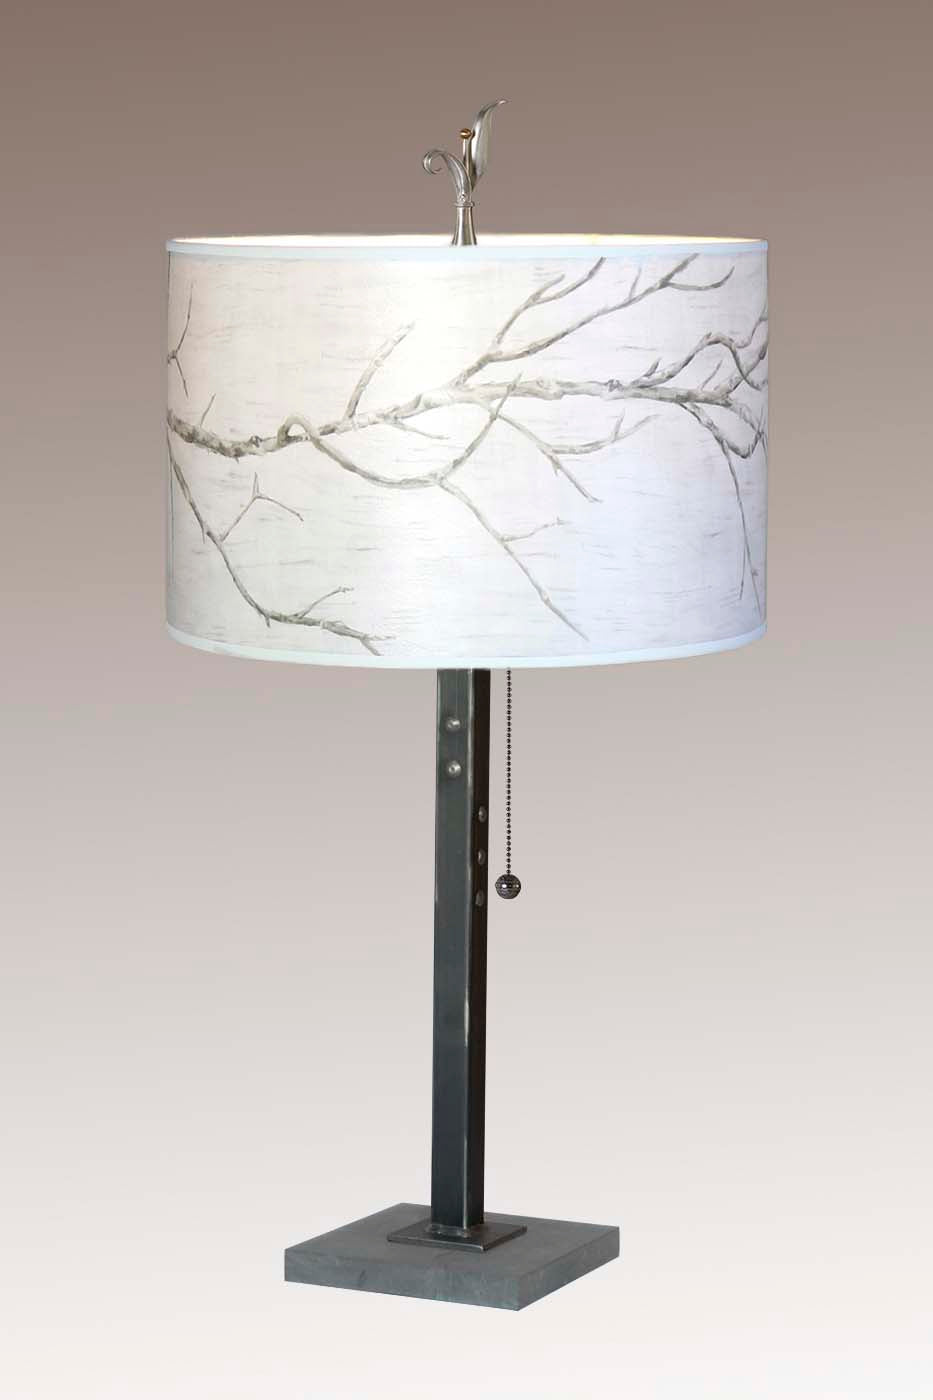 Steel Table Lamp with Large Drum Shade in Sweeping Branch